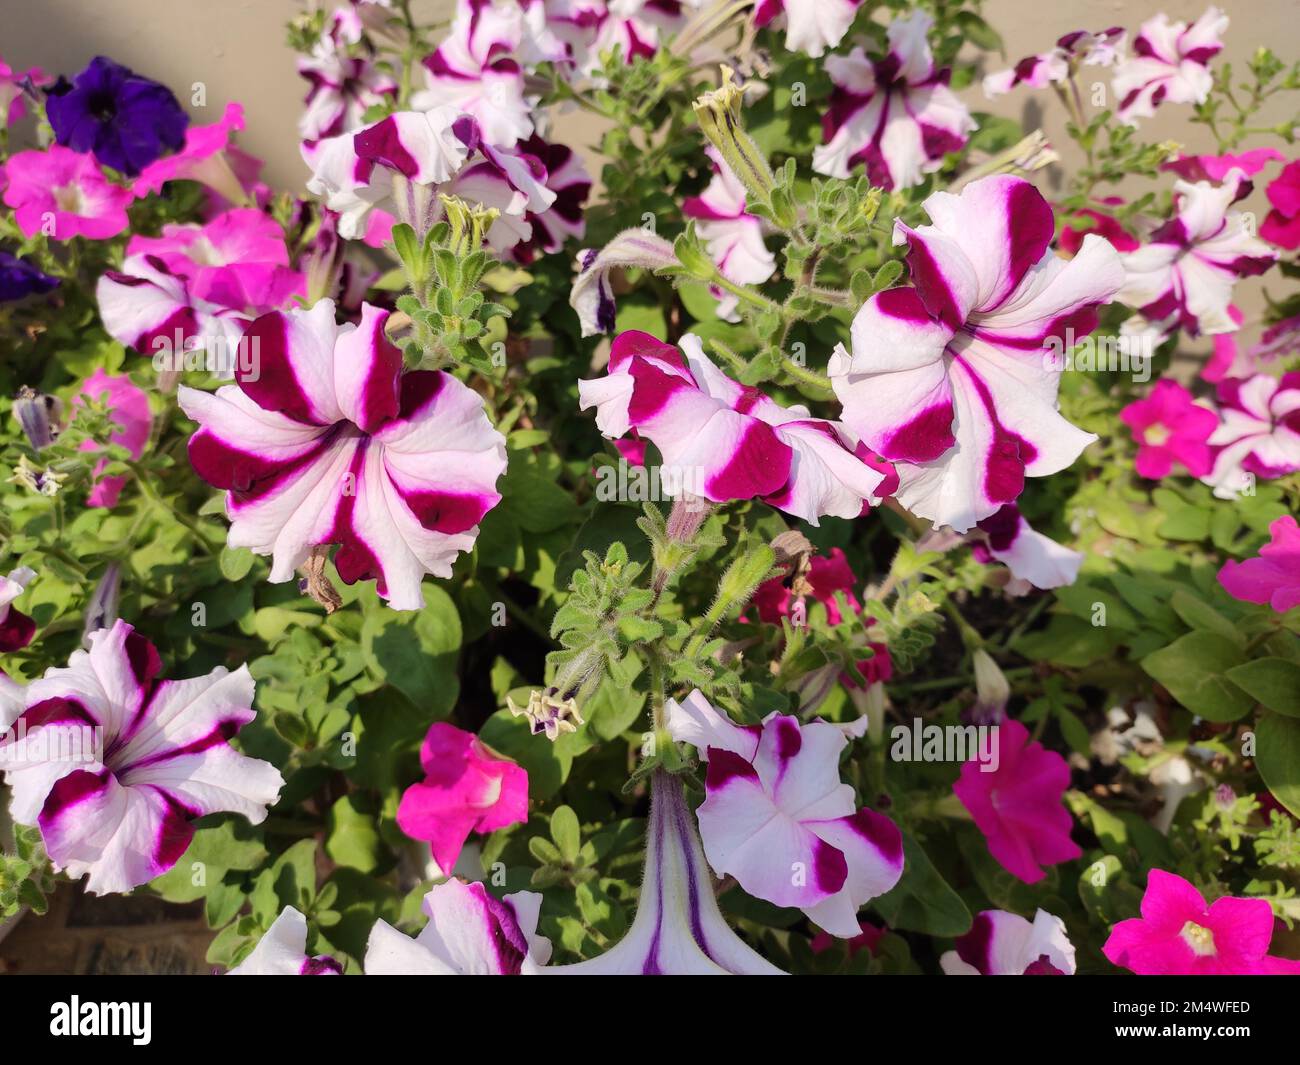 Garden flowering plant - Petunia. Color - purple and white mixed. Stock Photo